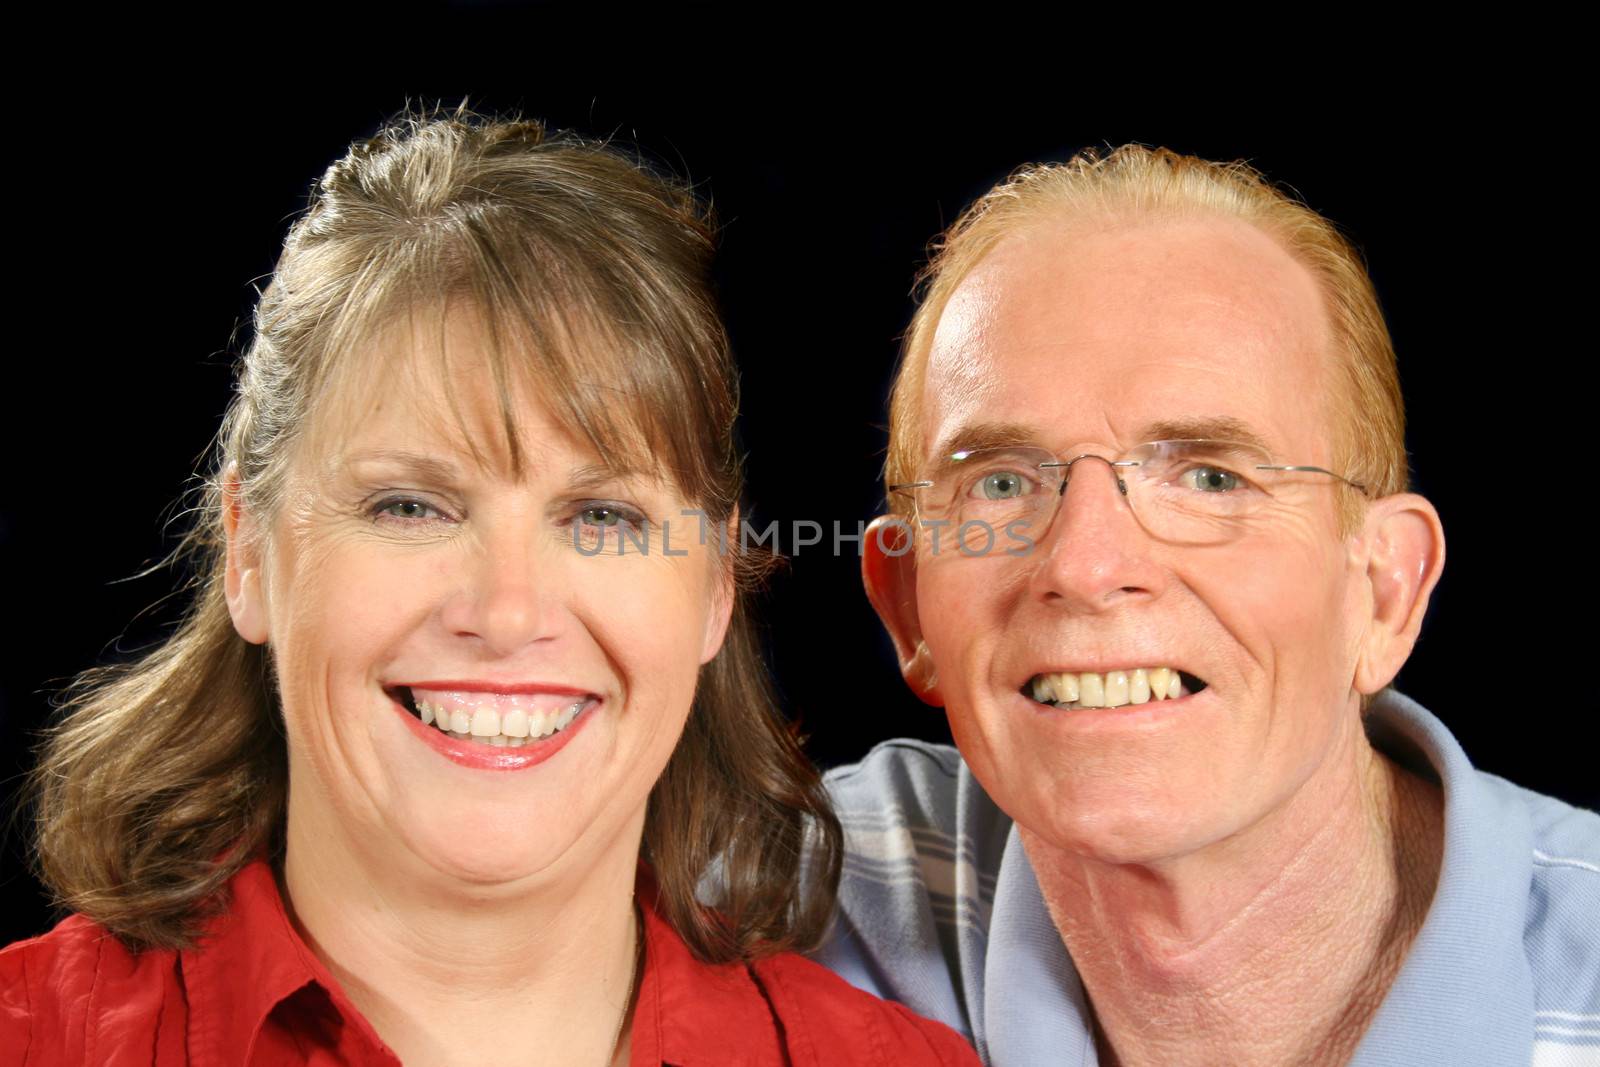 Middle aged couple together smiling. 